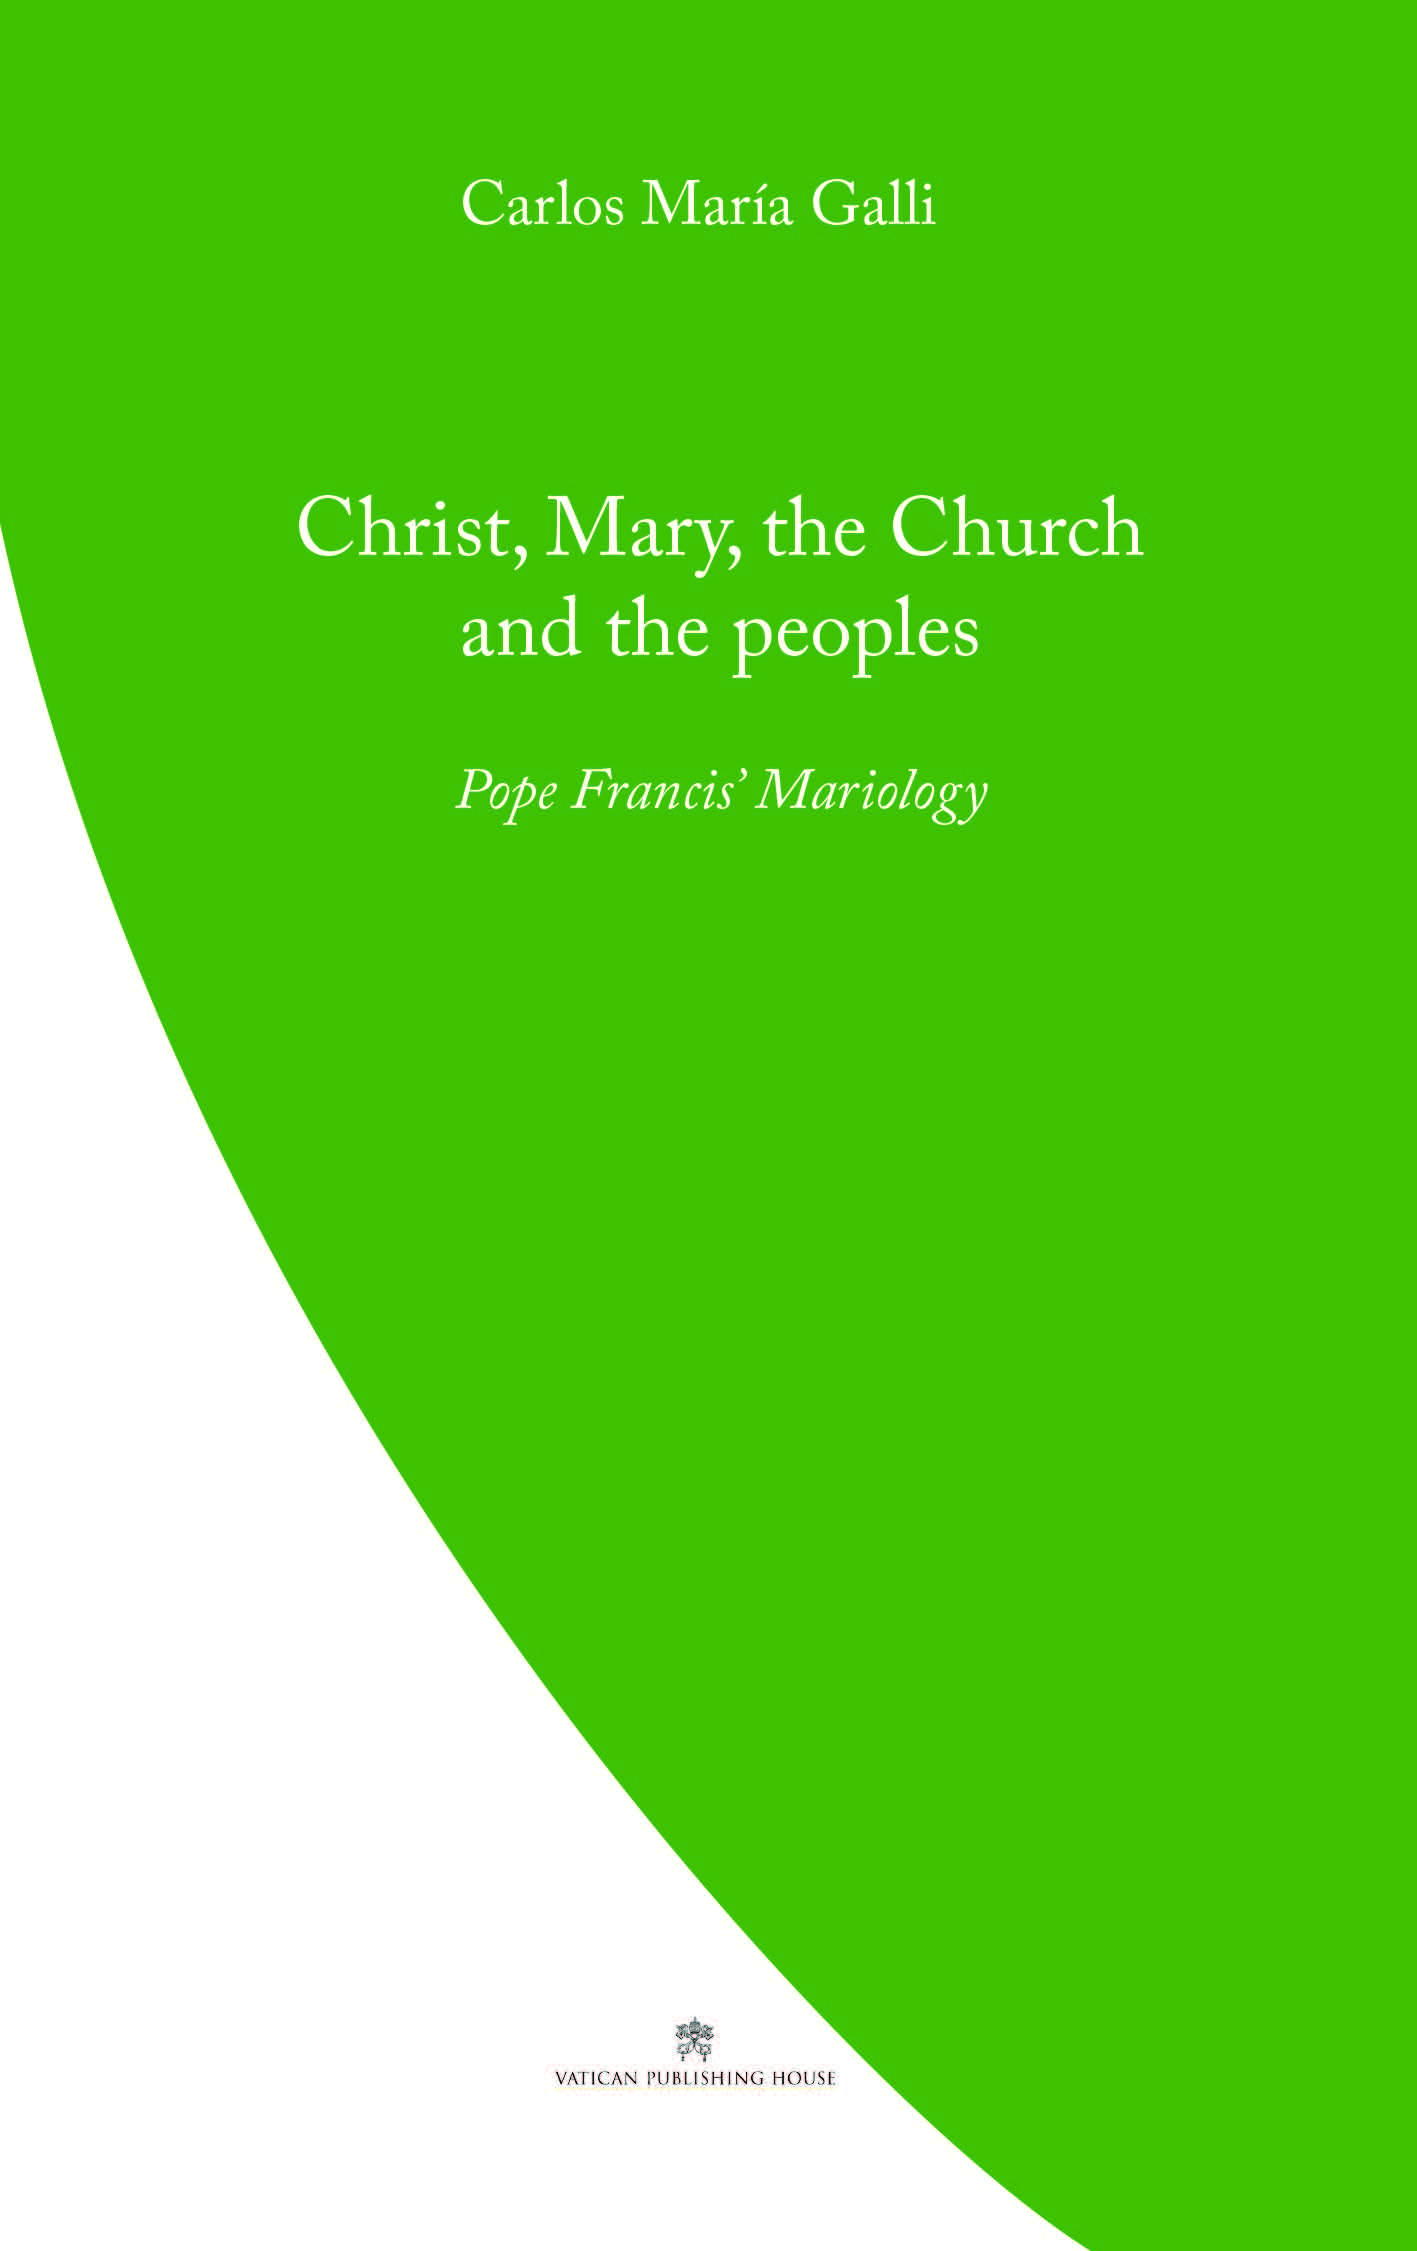 Christ, Mary, the Church and the Peoples  Pope Francis' Mariology / Carlos Maria Galli